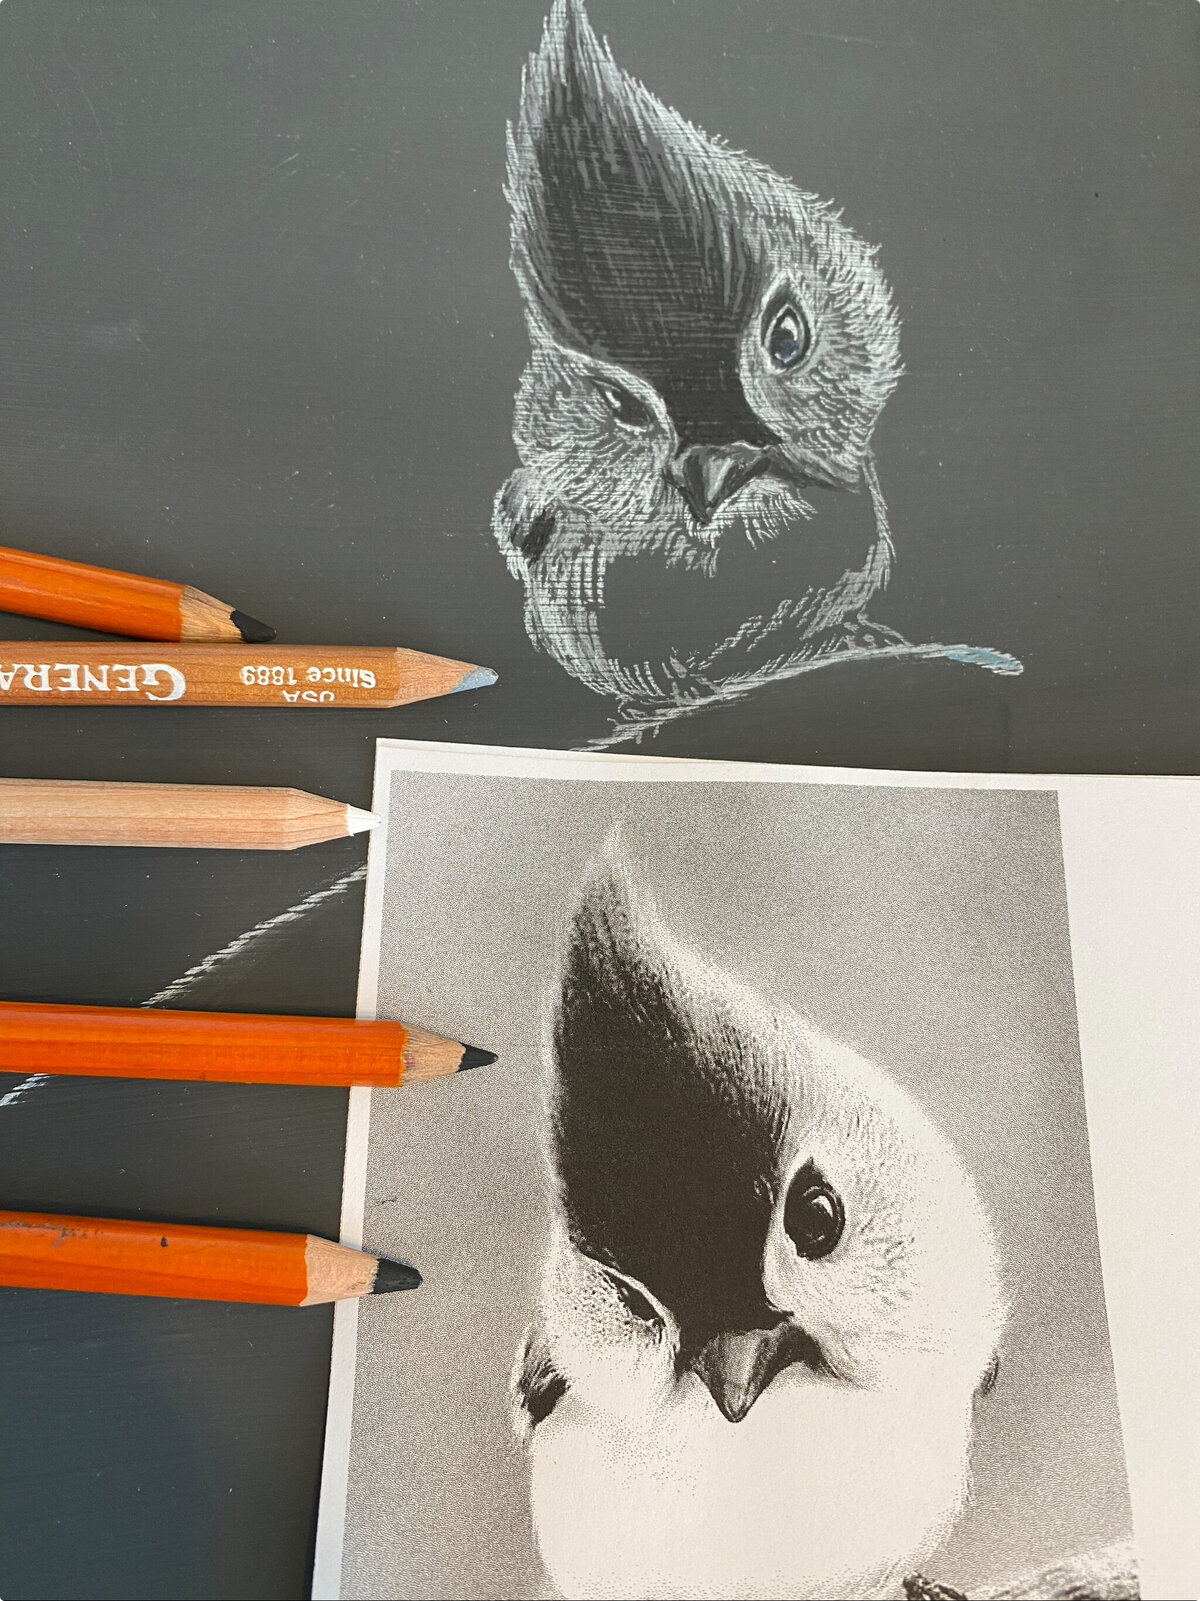 Illustration of a bird and the original photo of the bird with the pens used beside